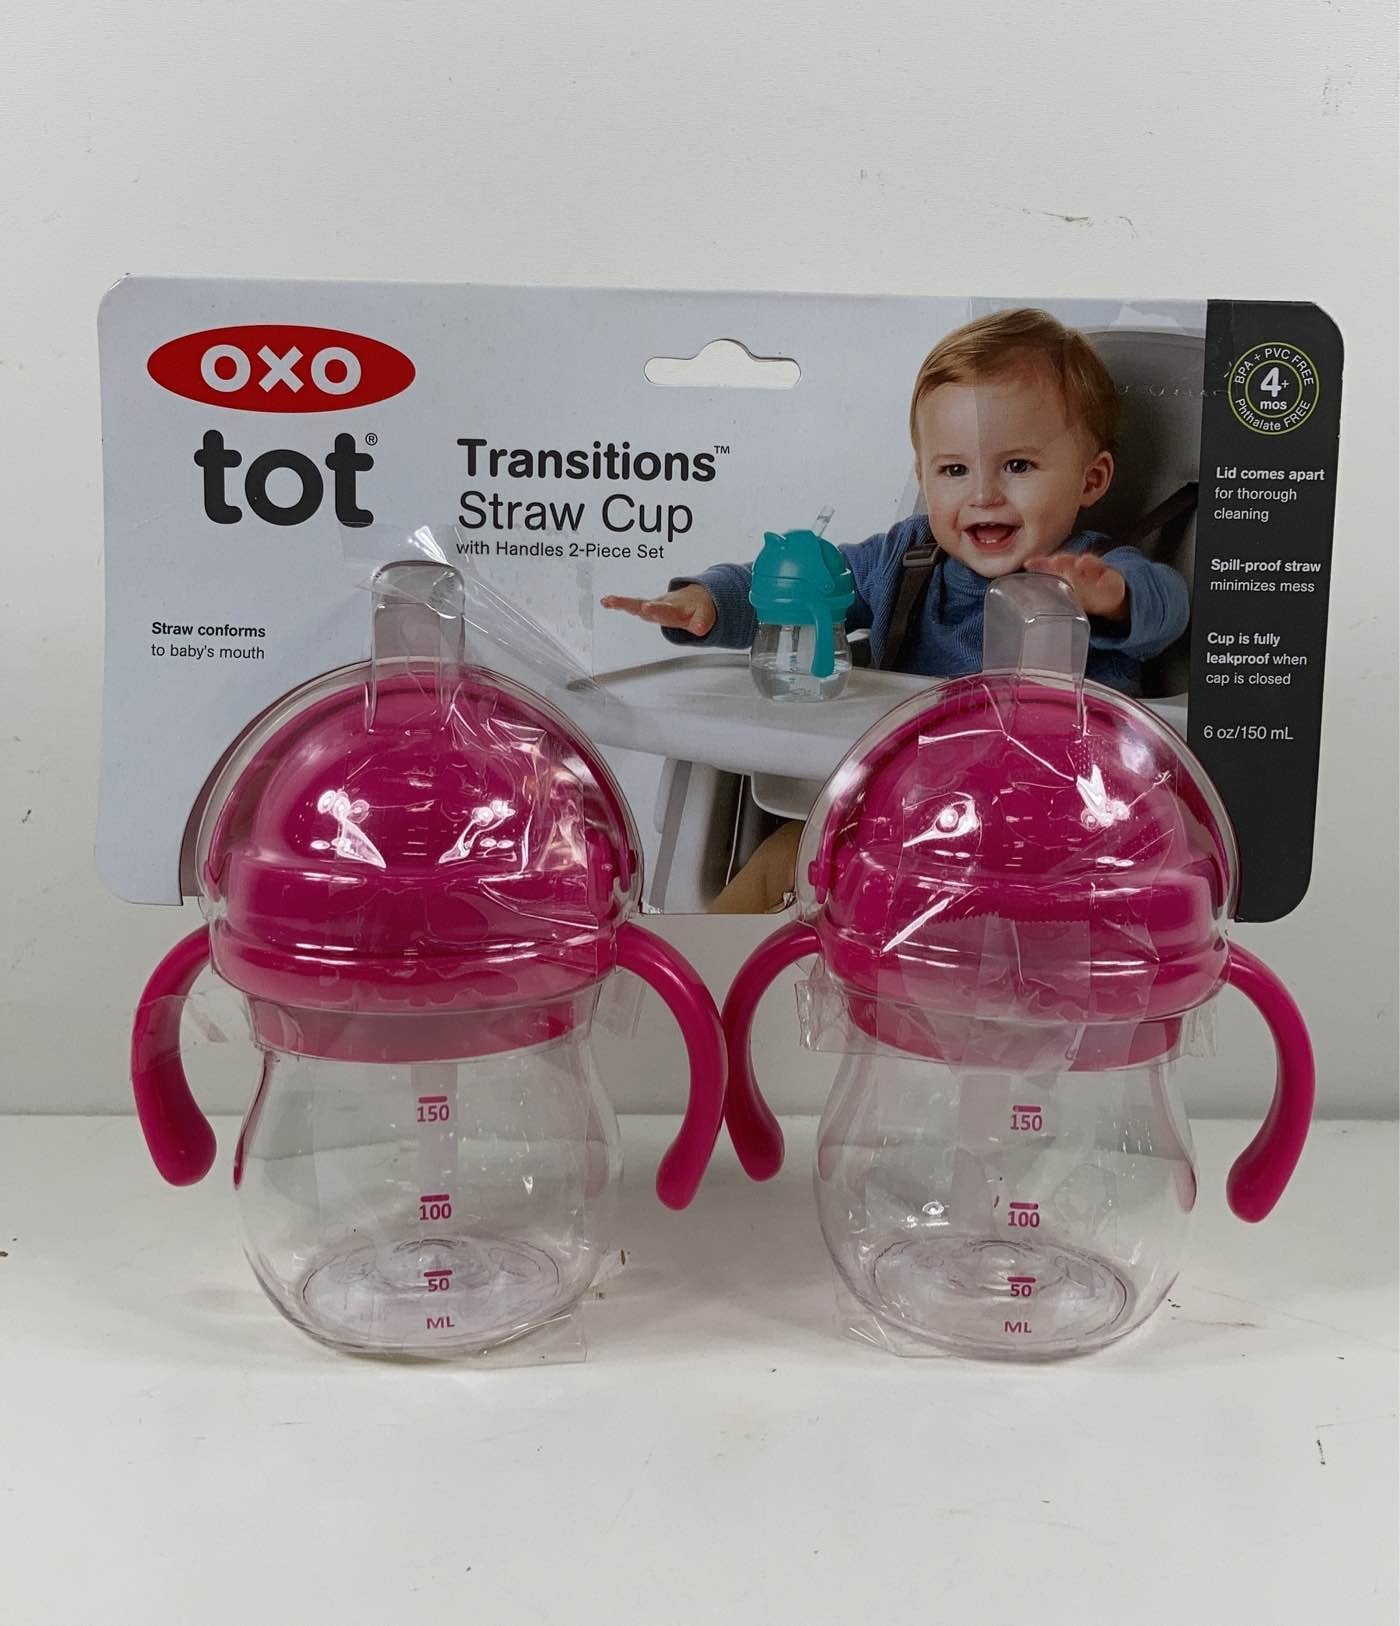 OXO Tot Transitions Straw Cups with Handles Set, Pink